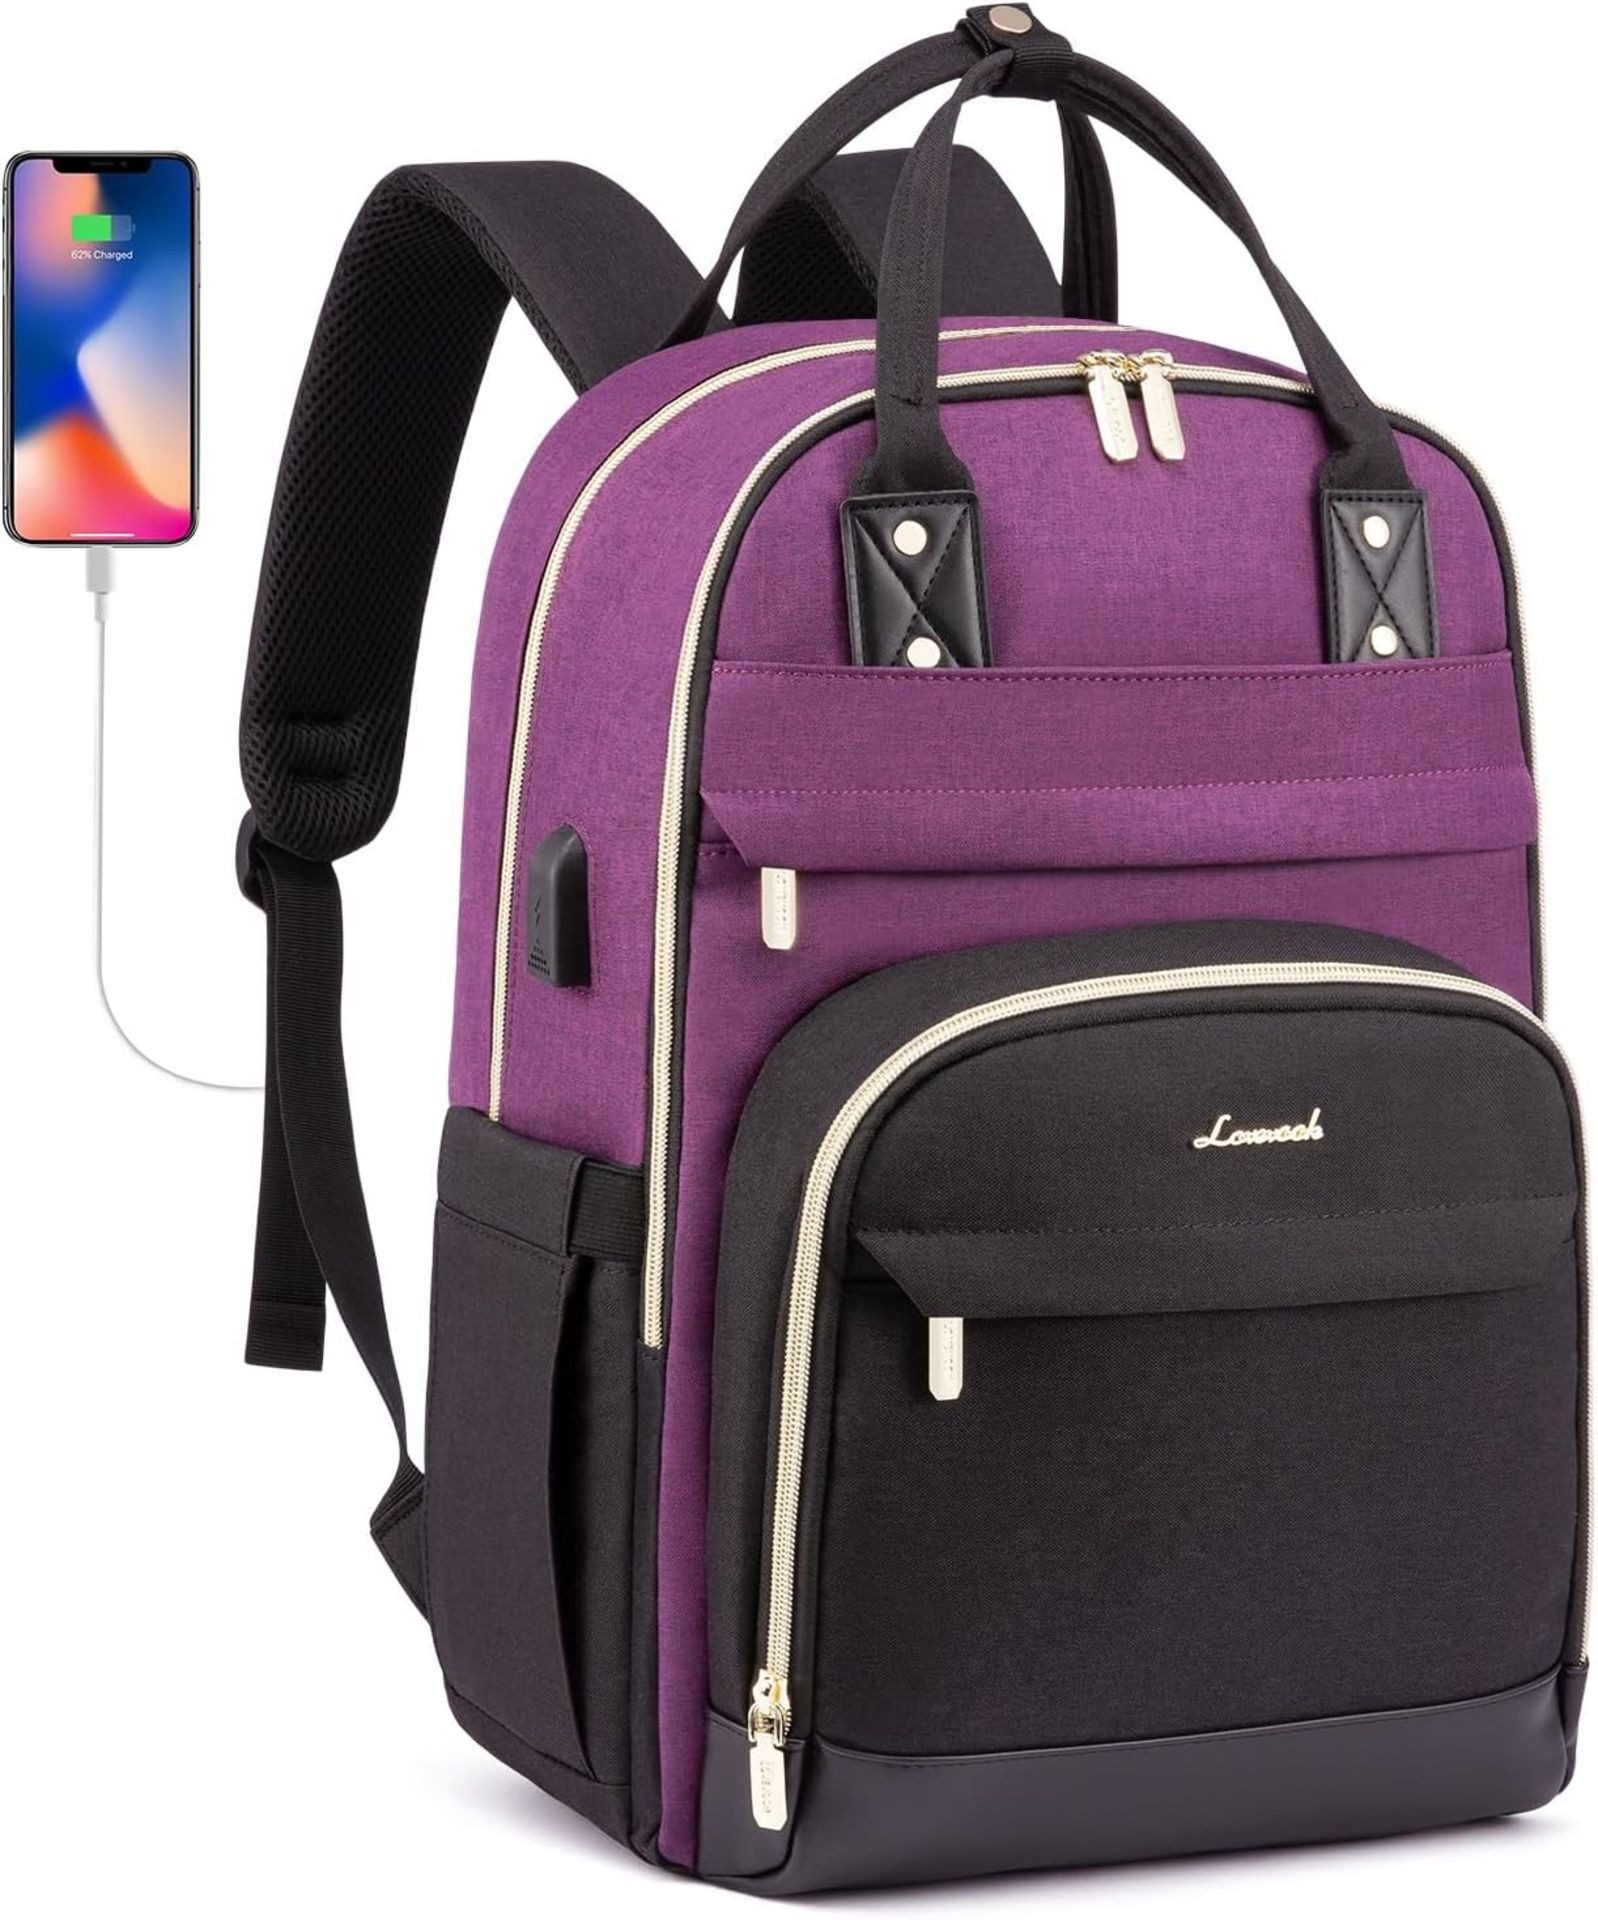 RRP £35.99 LOVEVOOK Laptop Backpack 15.6 inch, Large Rucksack Bag for Women with USB Port,